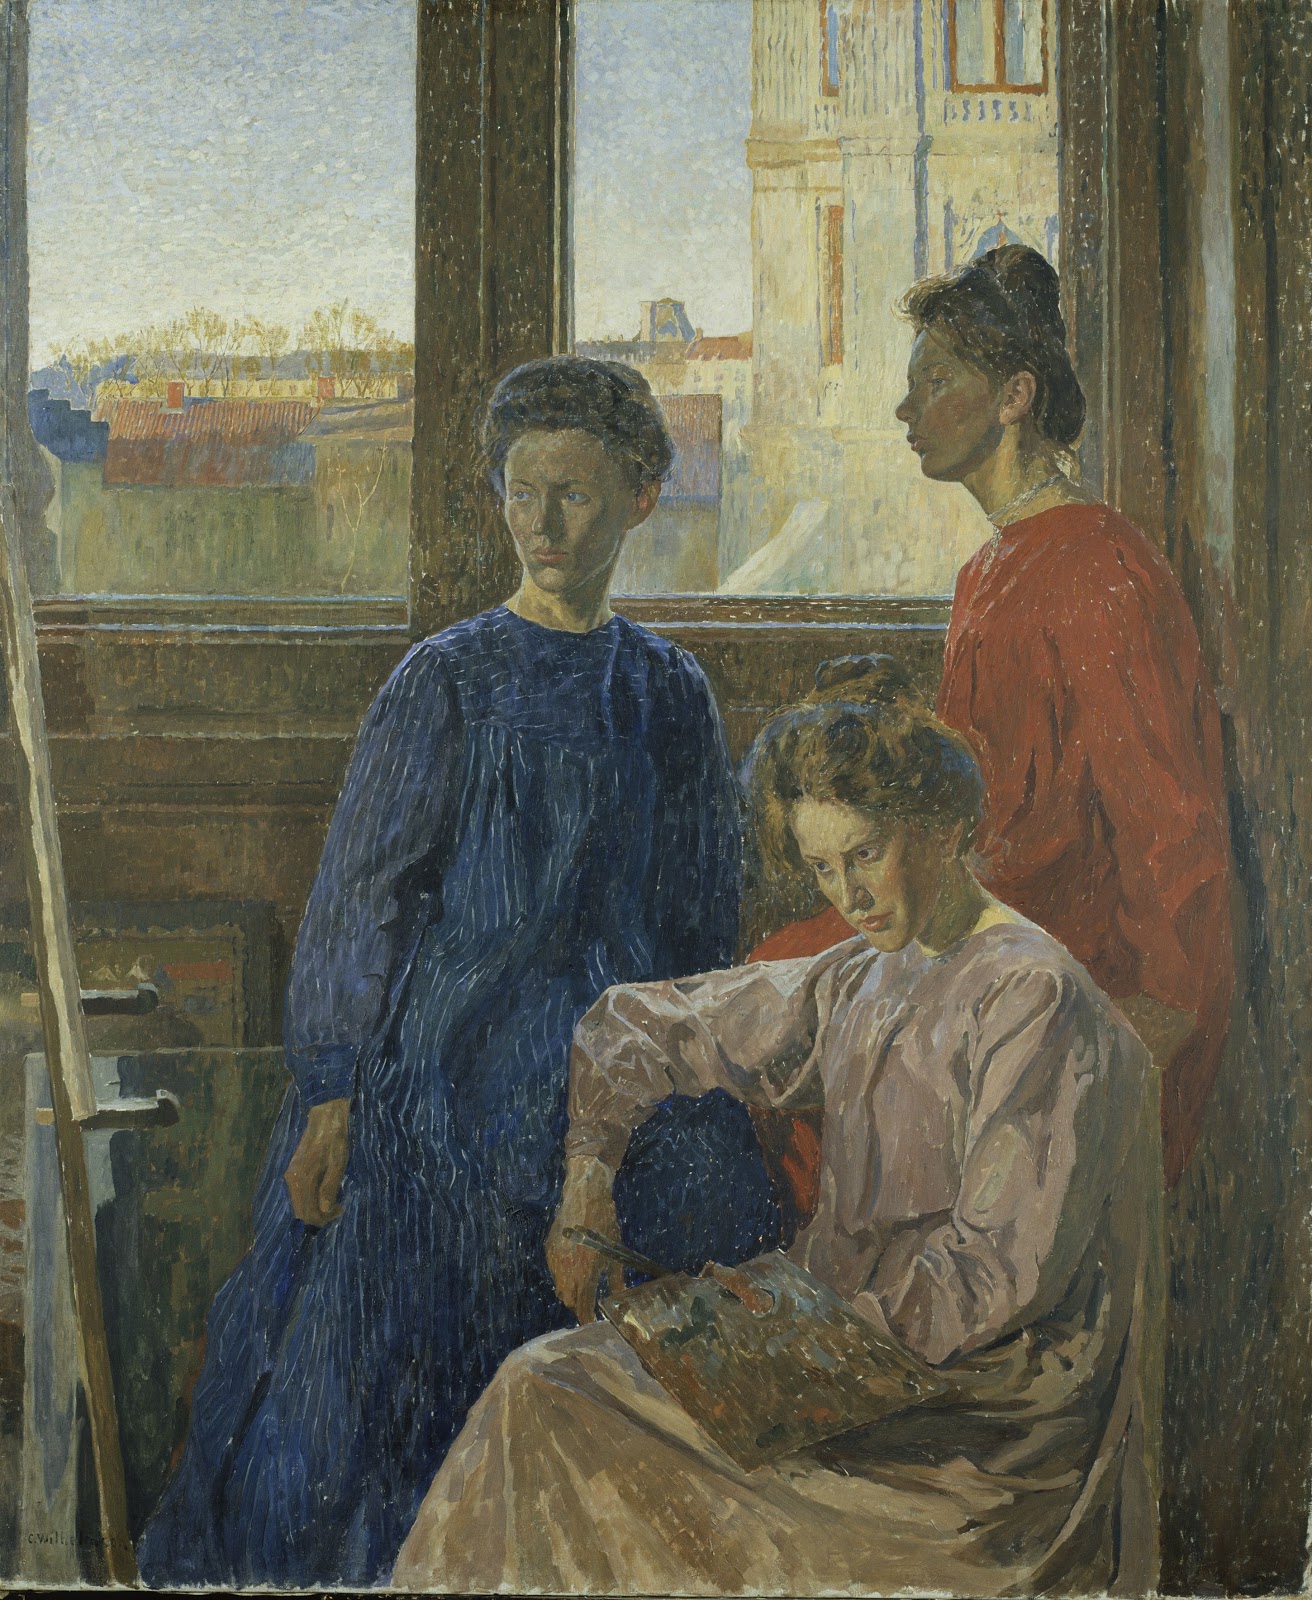 Carl Wilhelmson, Thorsten Laurin, 1875-1954, painting, 1925, Oil on canvas,  Height, 85 cm (33.4 inches), Width, 75.5 cm (29.7 inches), Inscriptions,  Signed, C. Wilhelmson, Ekarne, 1925., down right, Reimagined by Gibon,  design